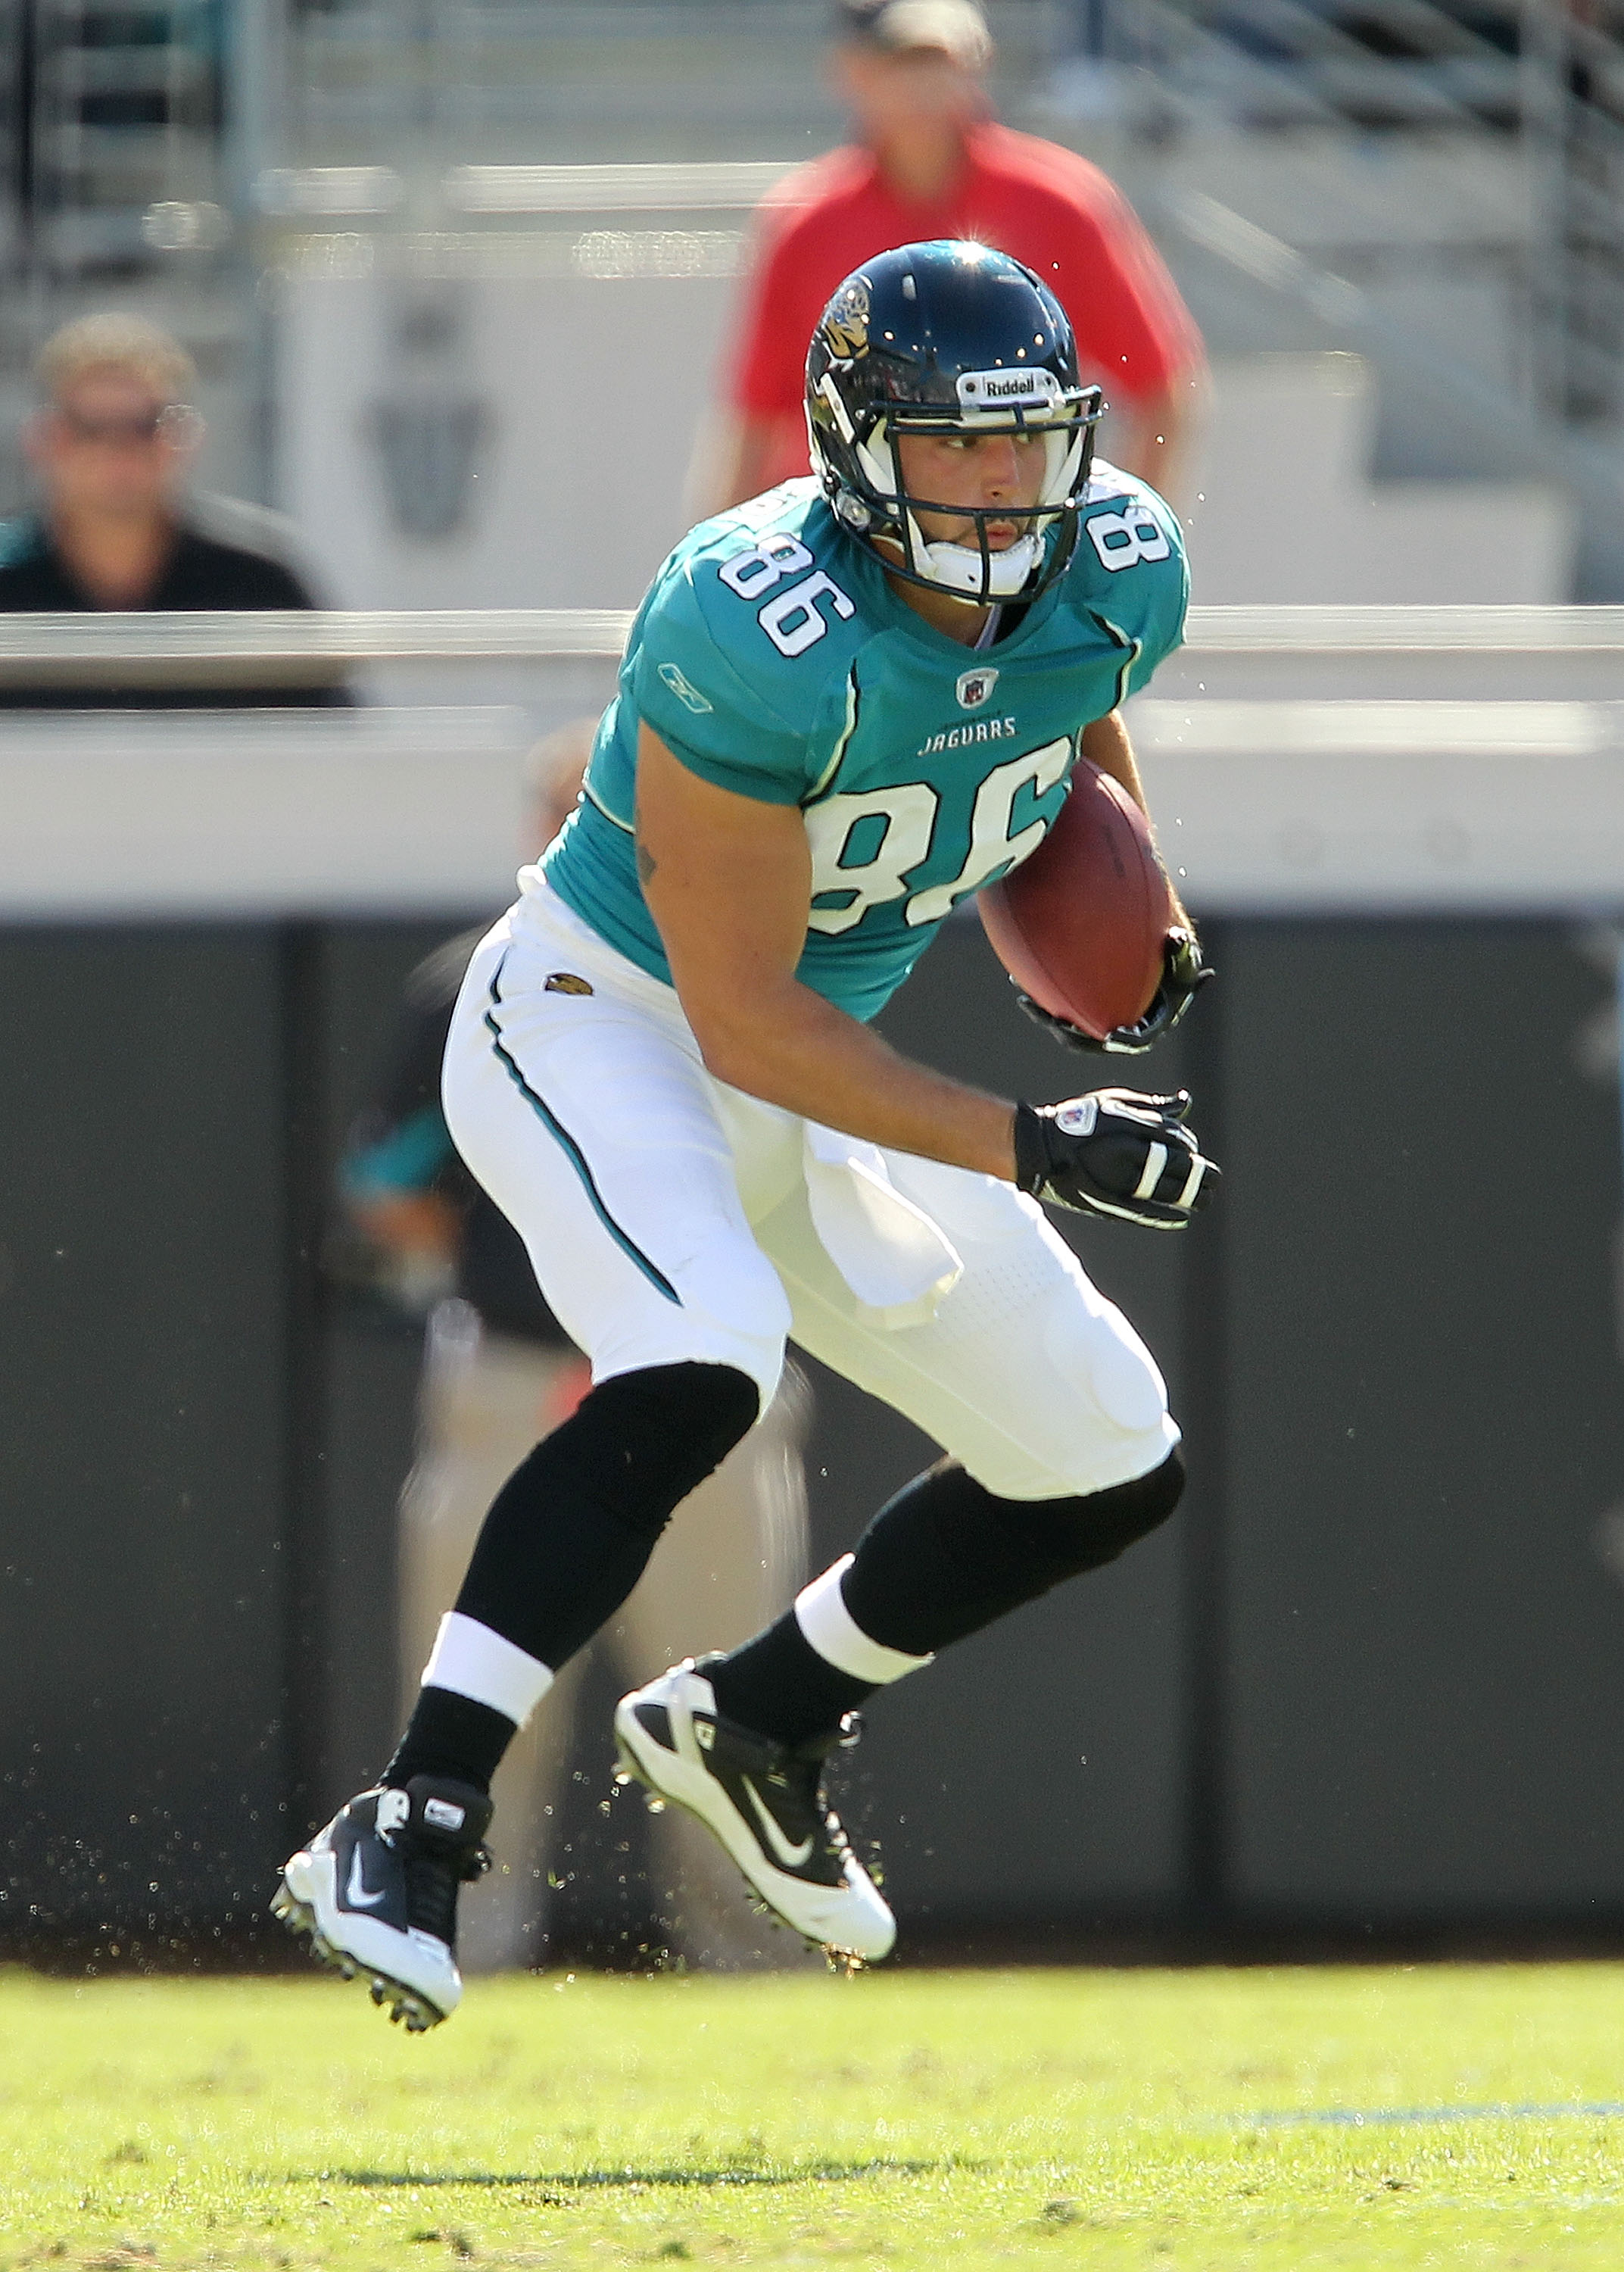 JACKSONVILLE, FL - NOVEMBER 14:  Zach Potter #86 of the Jacksonville Jaguars runs the ball in for a touchdown during a game against the Houston Texans at EverBank Field on November 14, 2010 in Jacksonville, Florida.  (Photo by Mike Ehrmann/Getty Images)